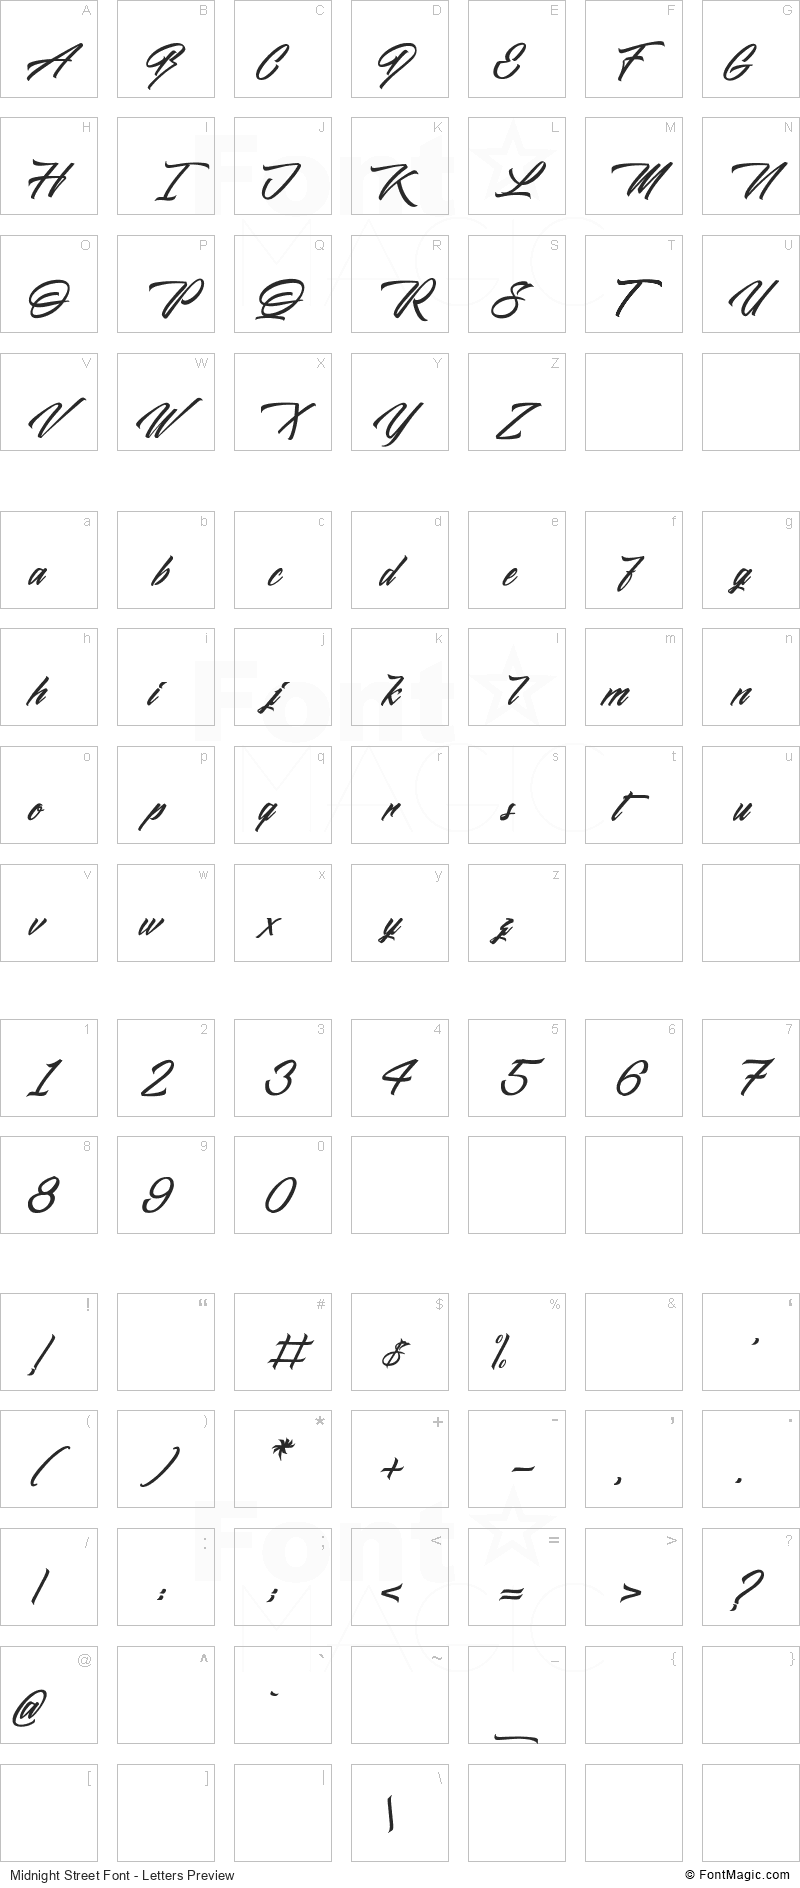 Midnight Street Font - All Latters Preview Chart